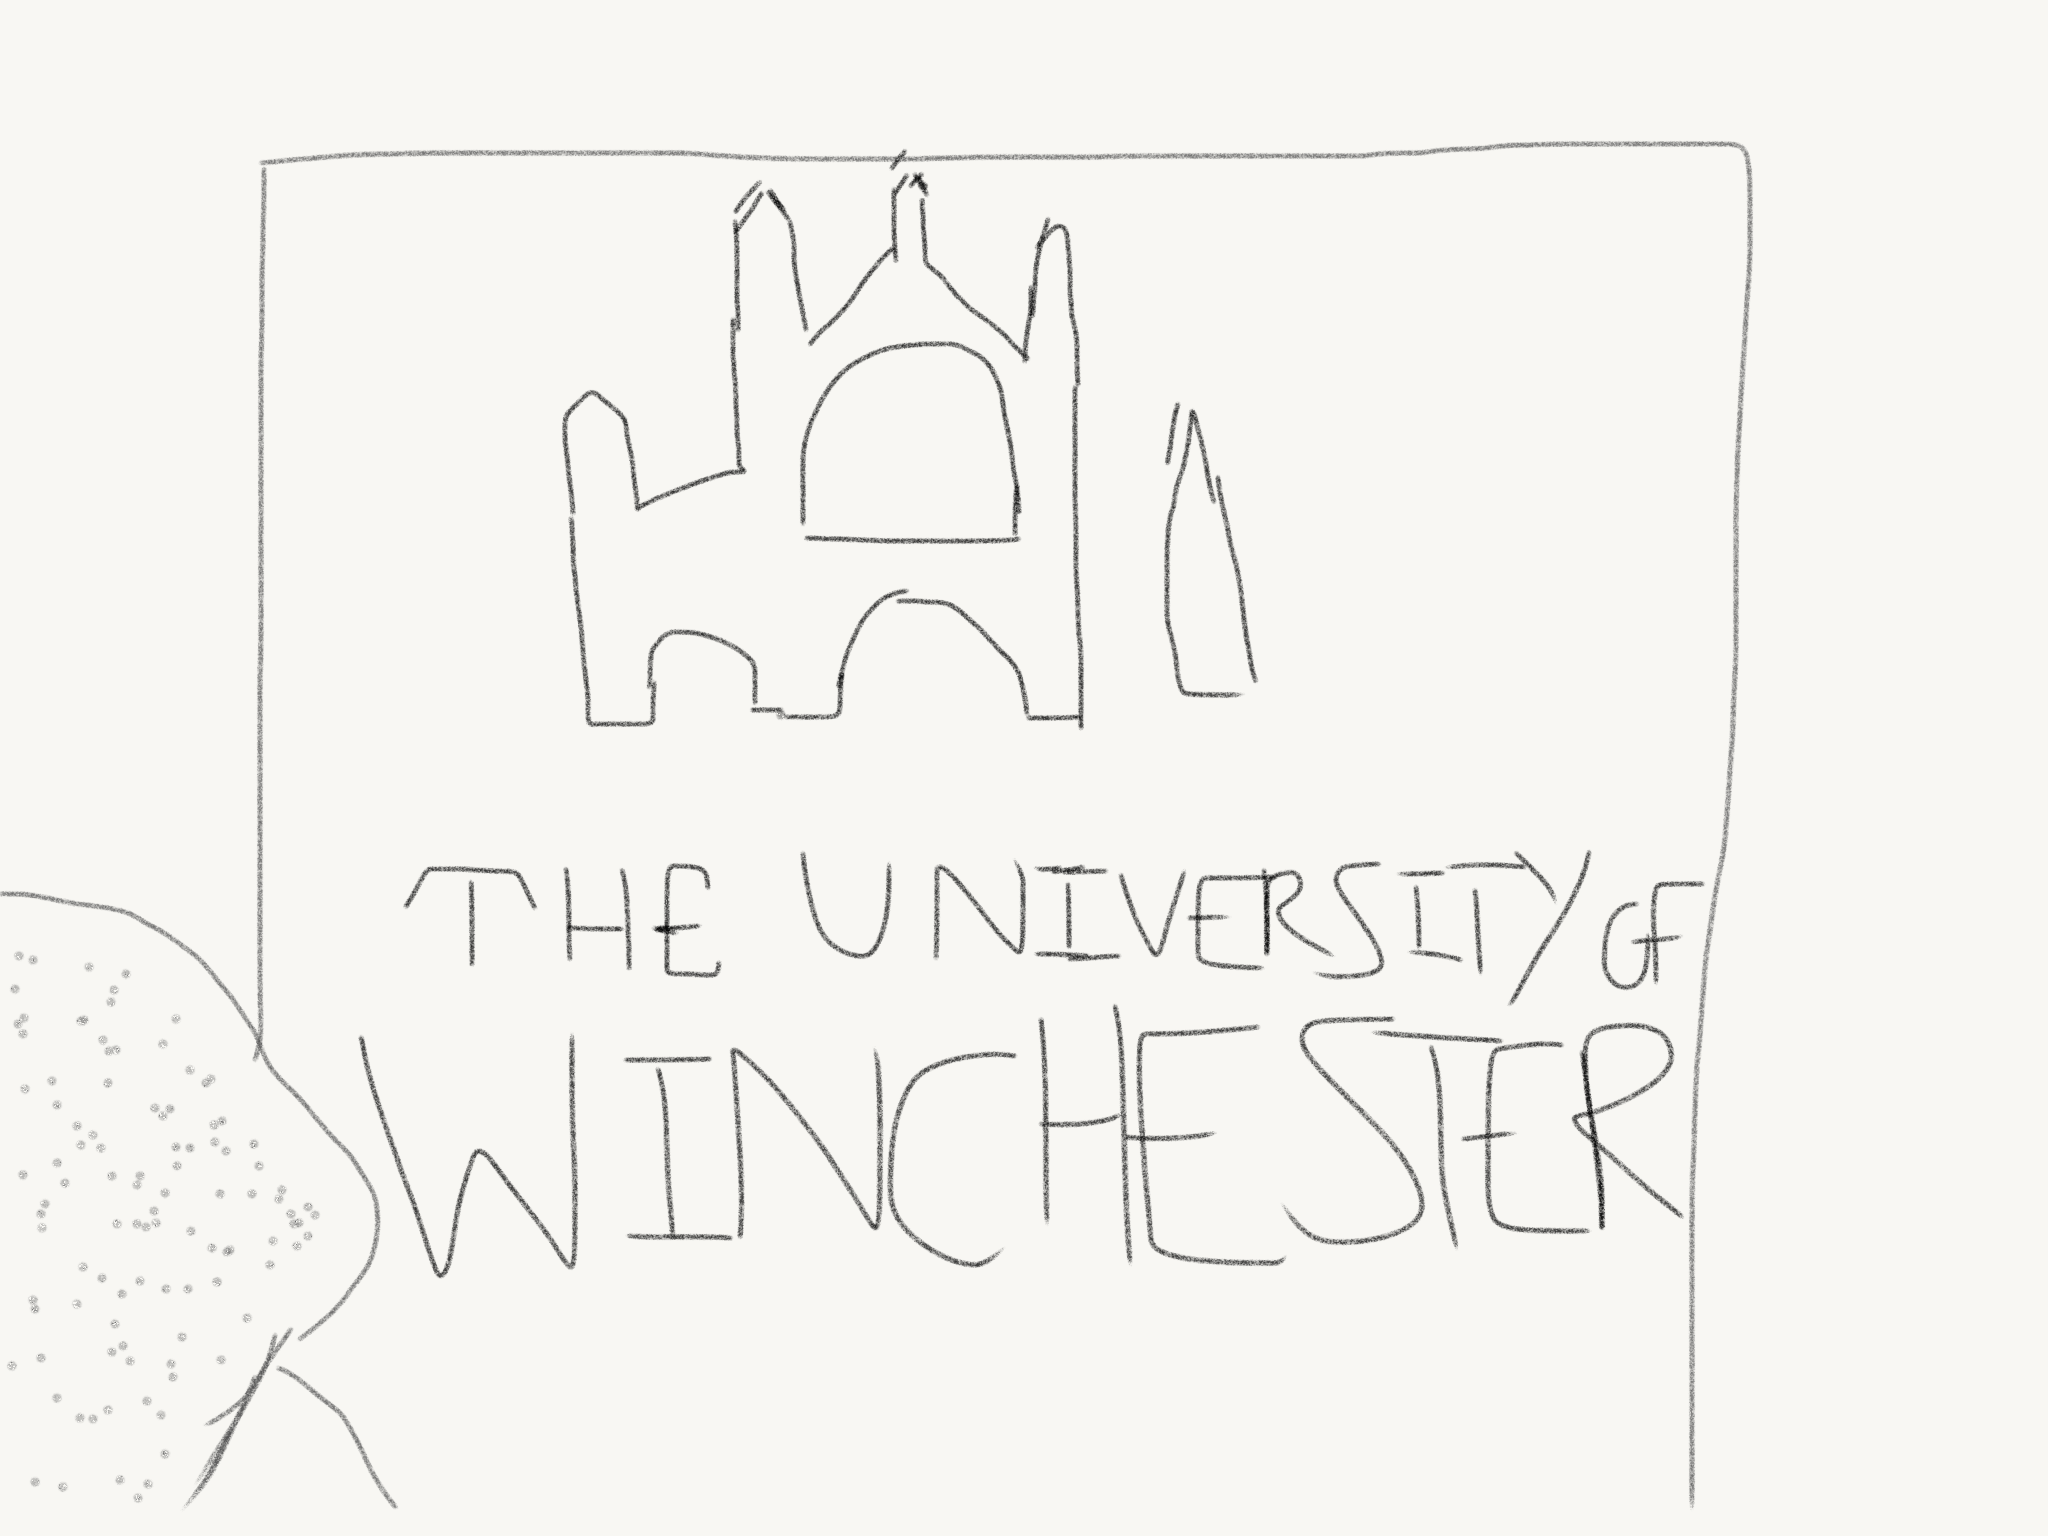 The Sketch of the 'University of Winchester' Sign